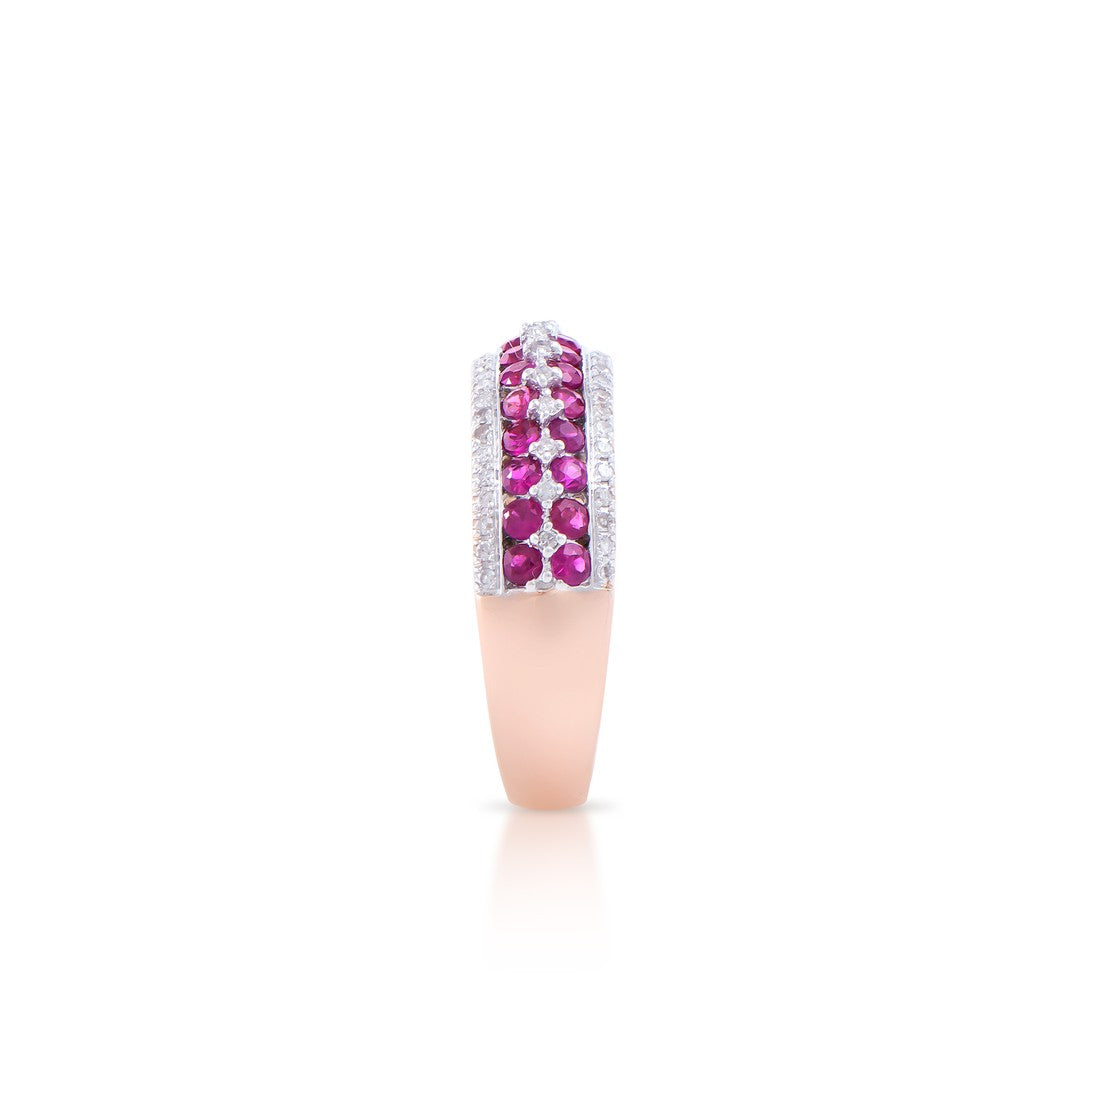 14KT Rose Gold 1.56ctw Ruby and Diamond Ring